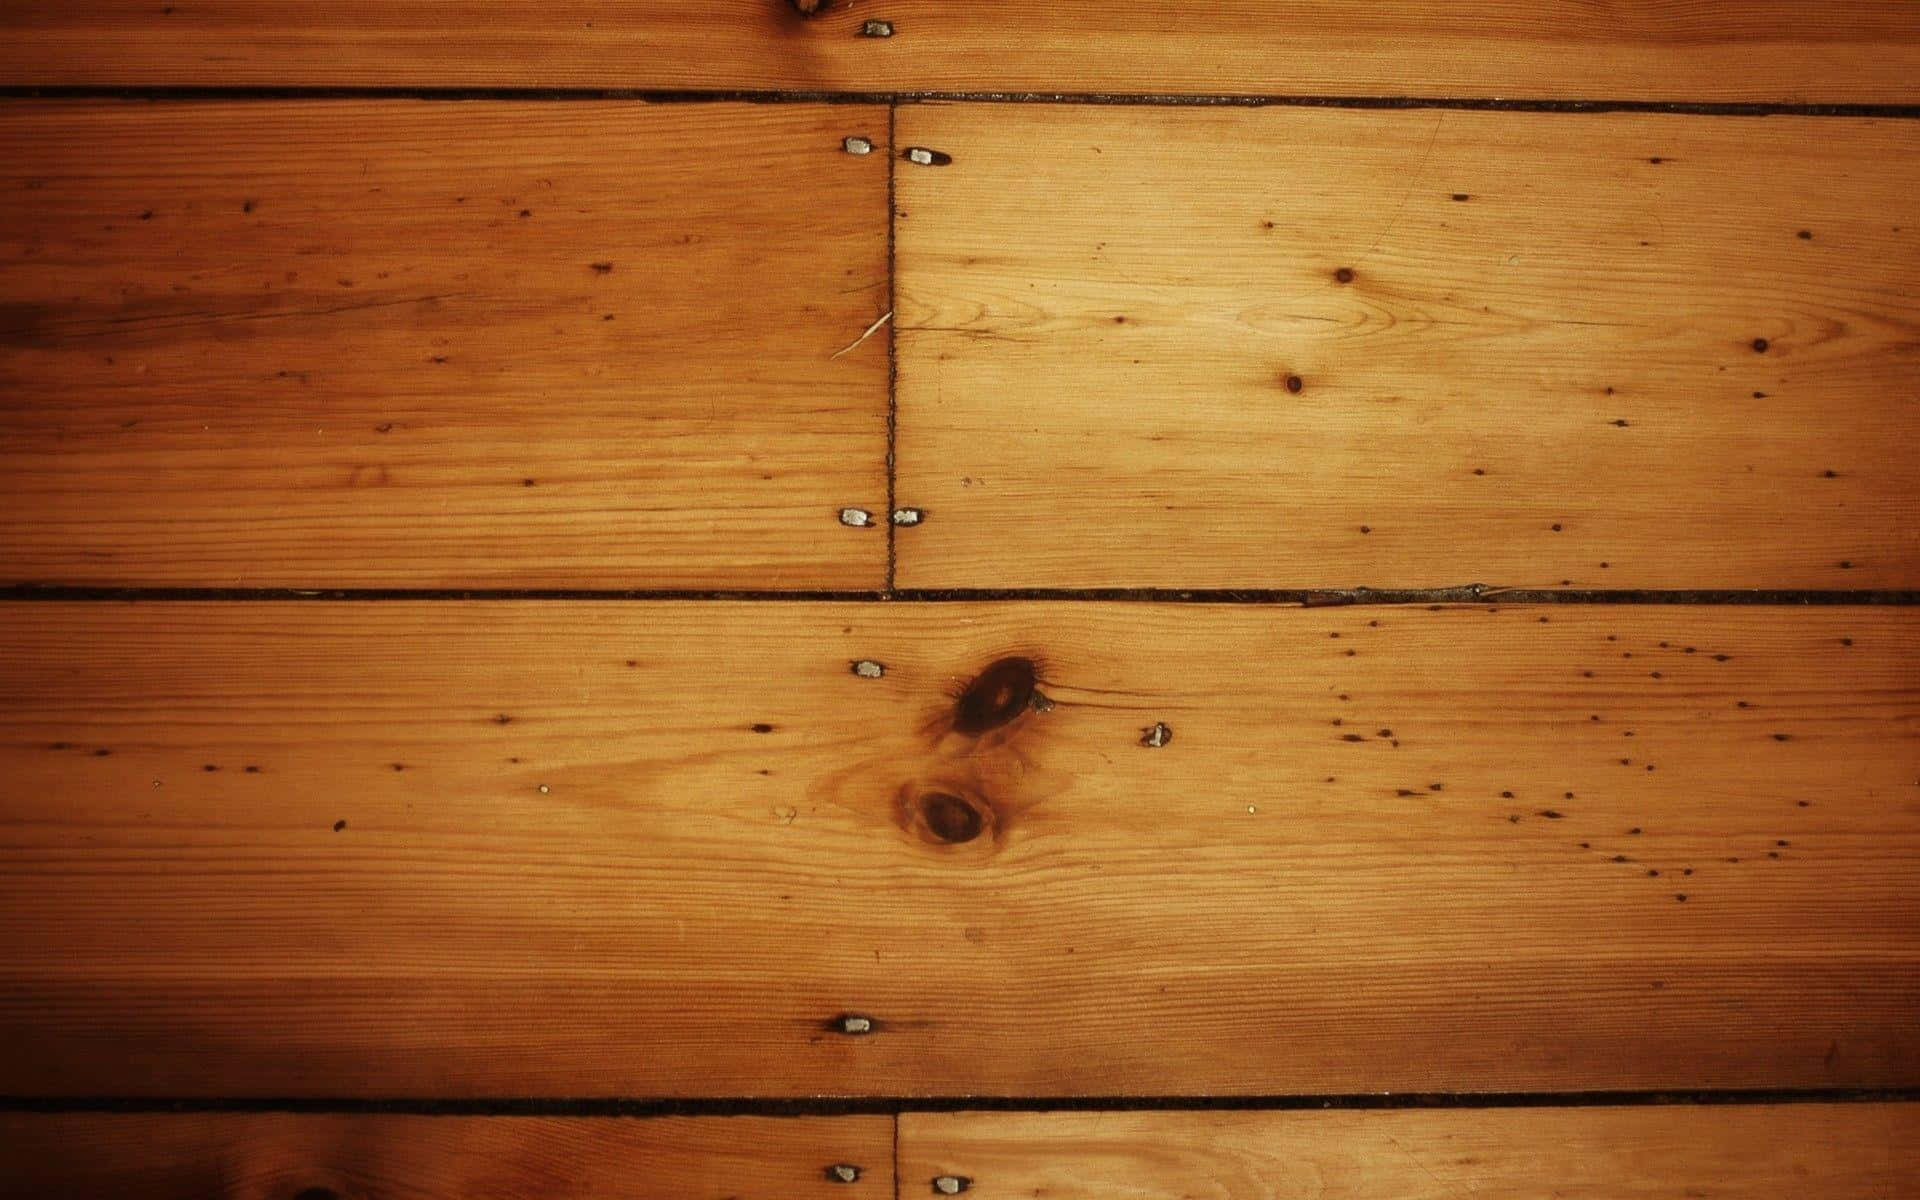 A Wooden Floor With Nails On It